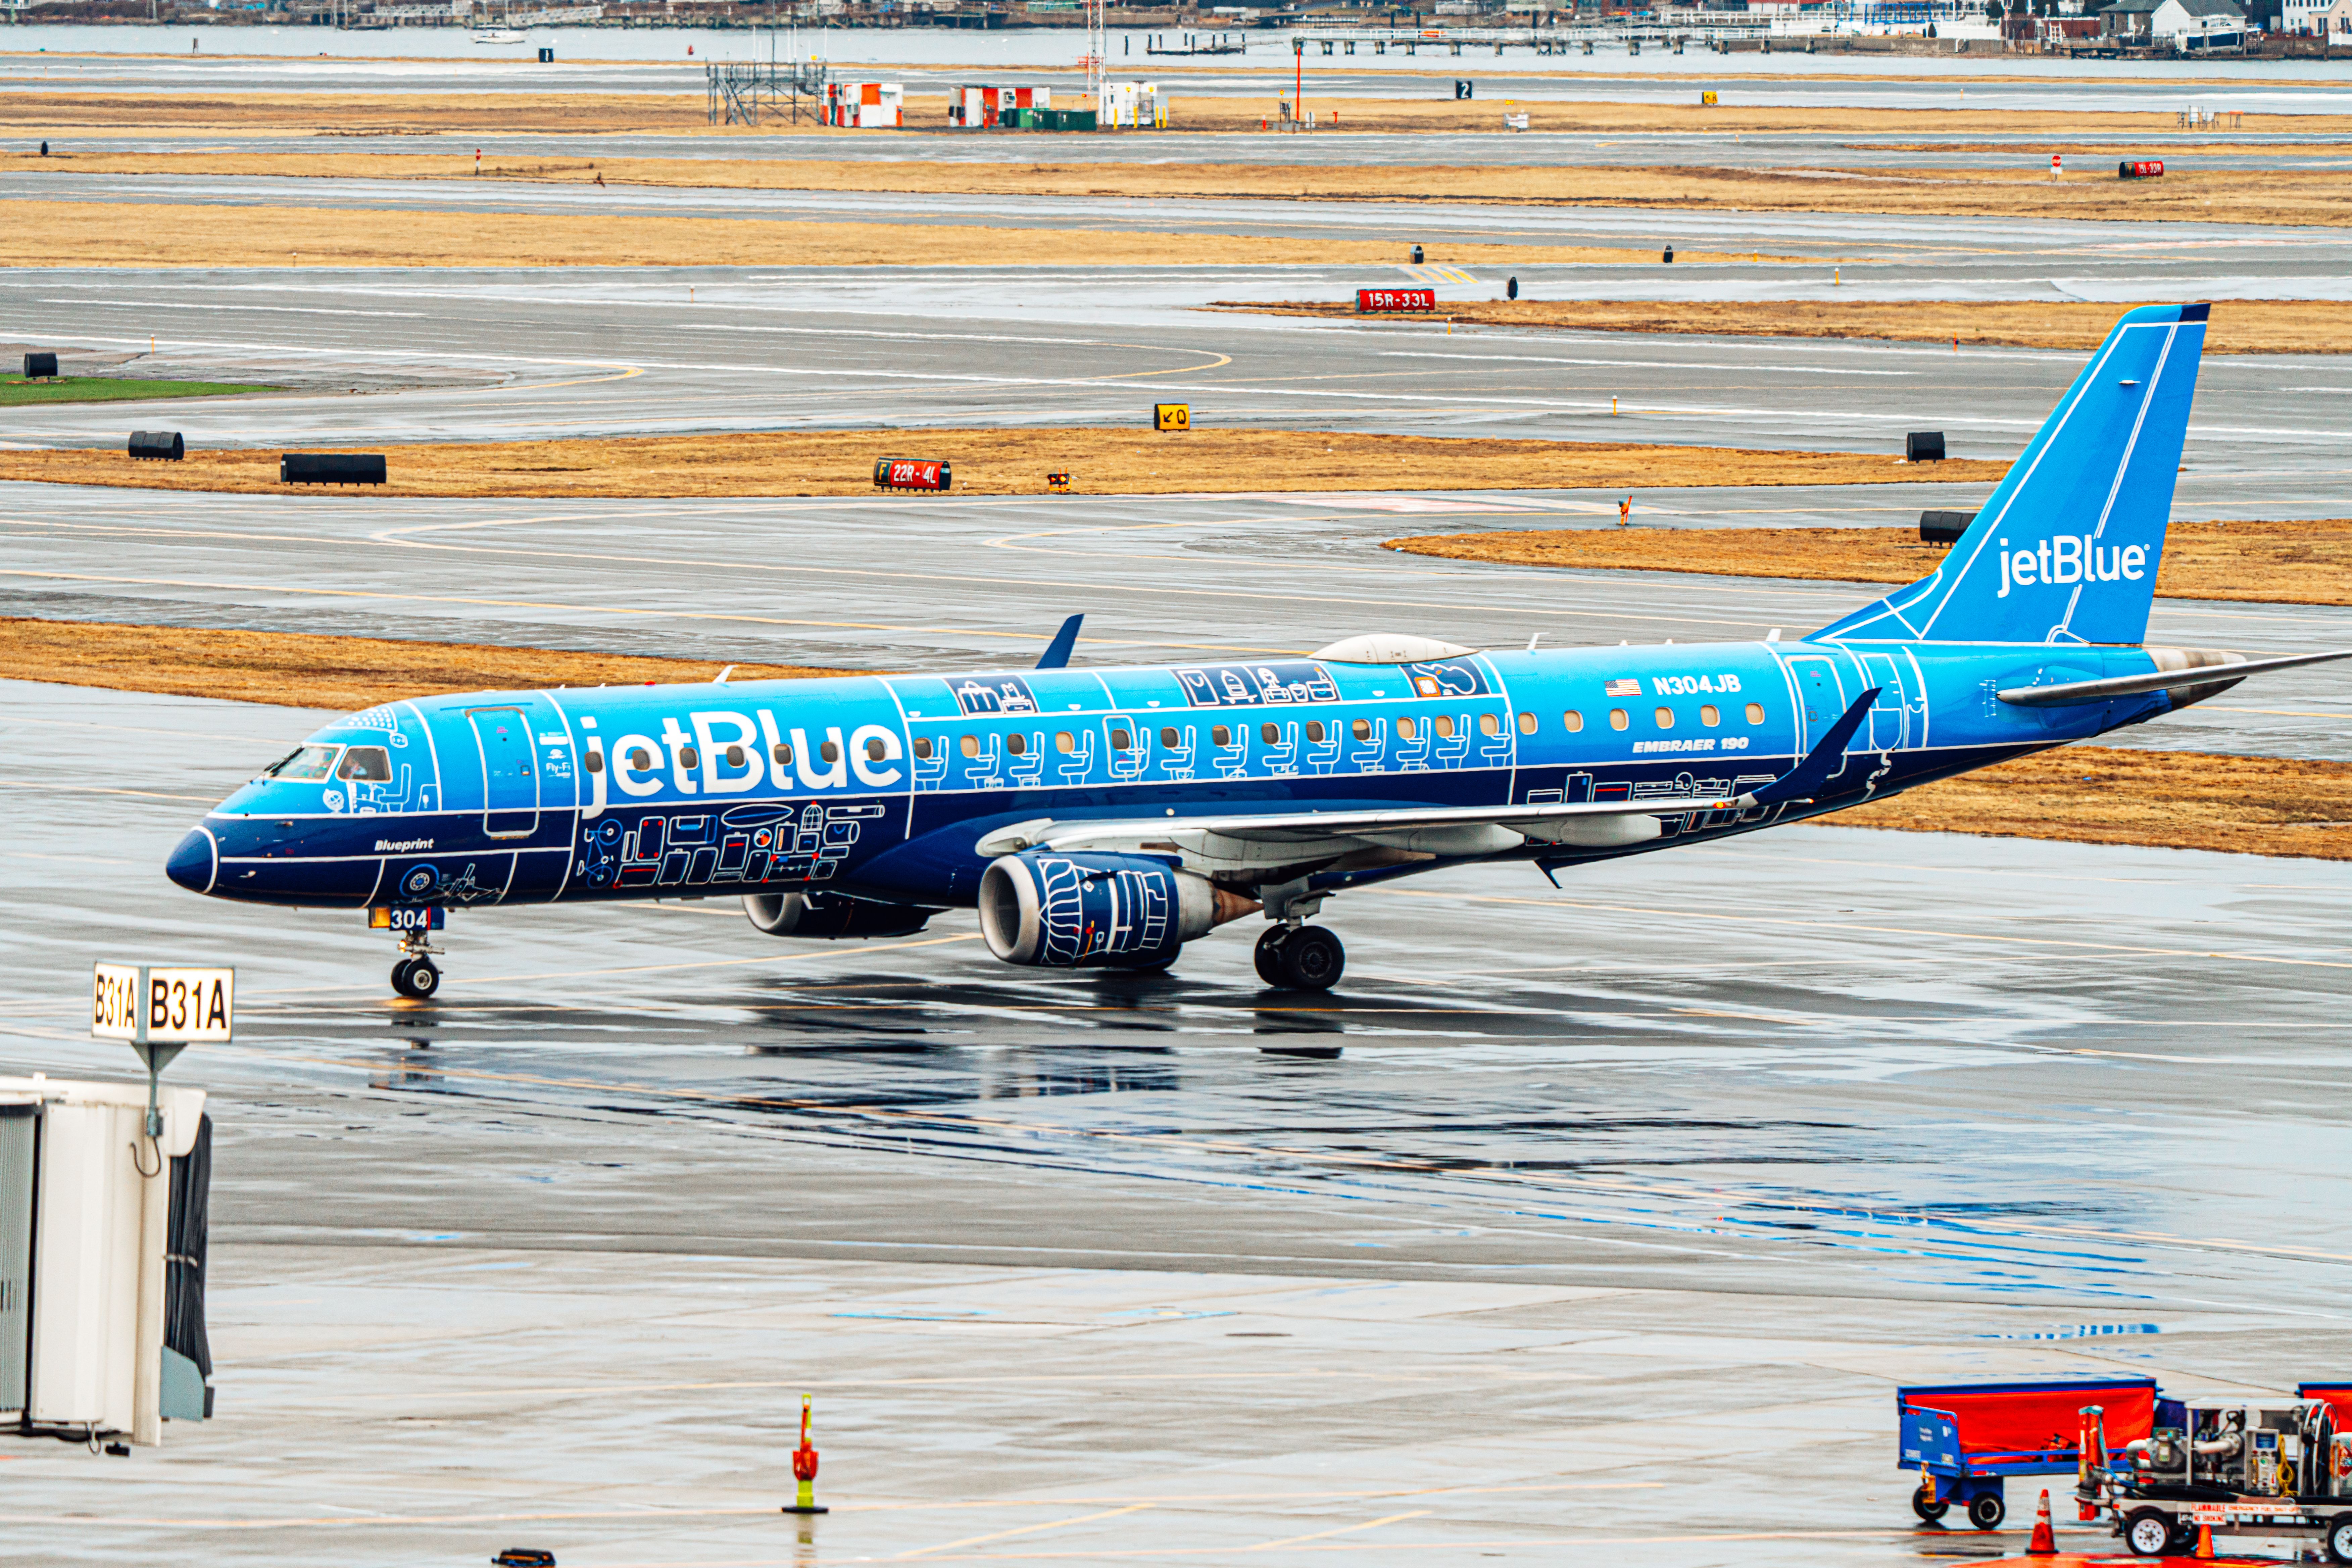 JetBlue Embraer E190 taxiing to gate BOS